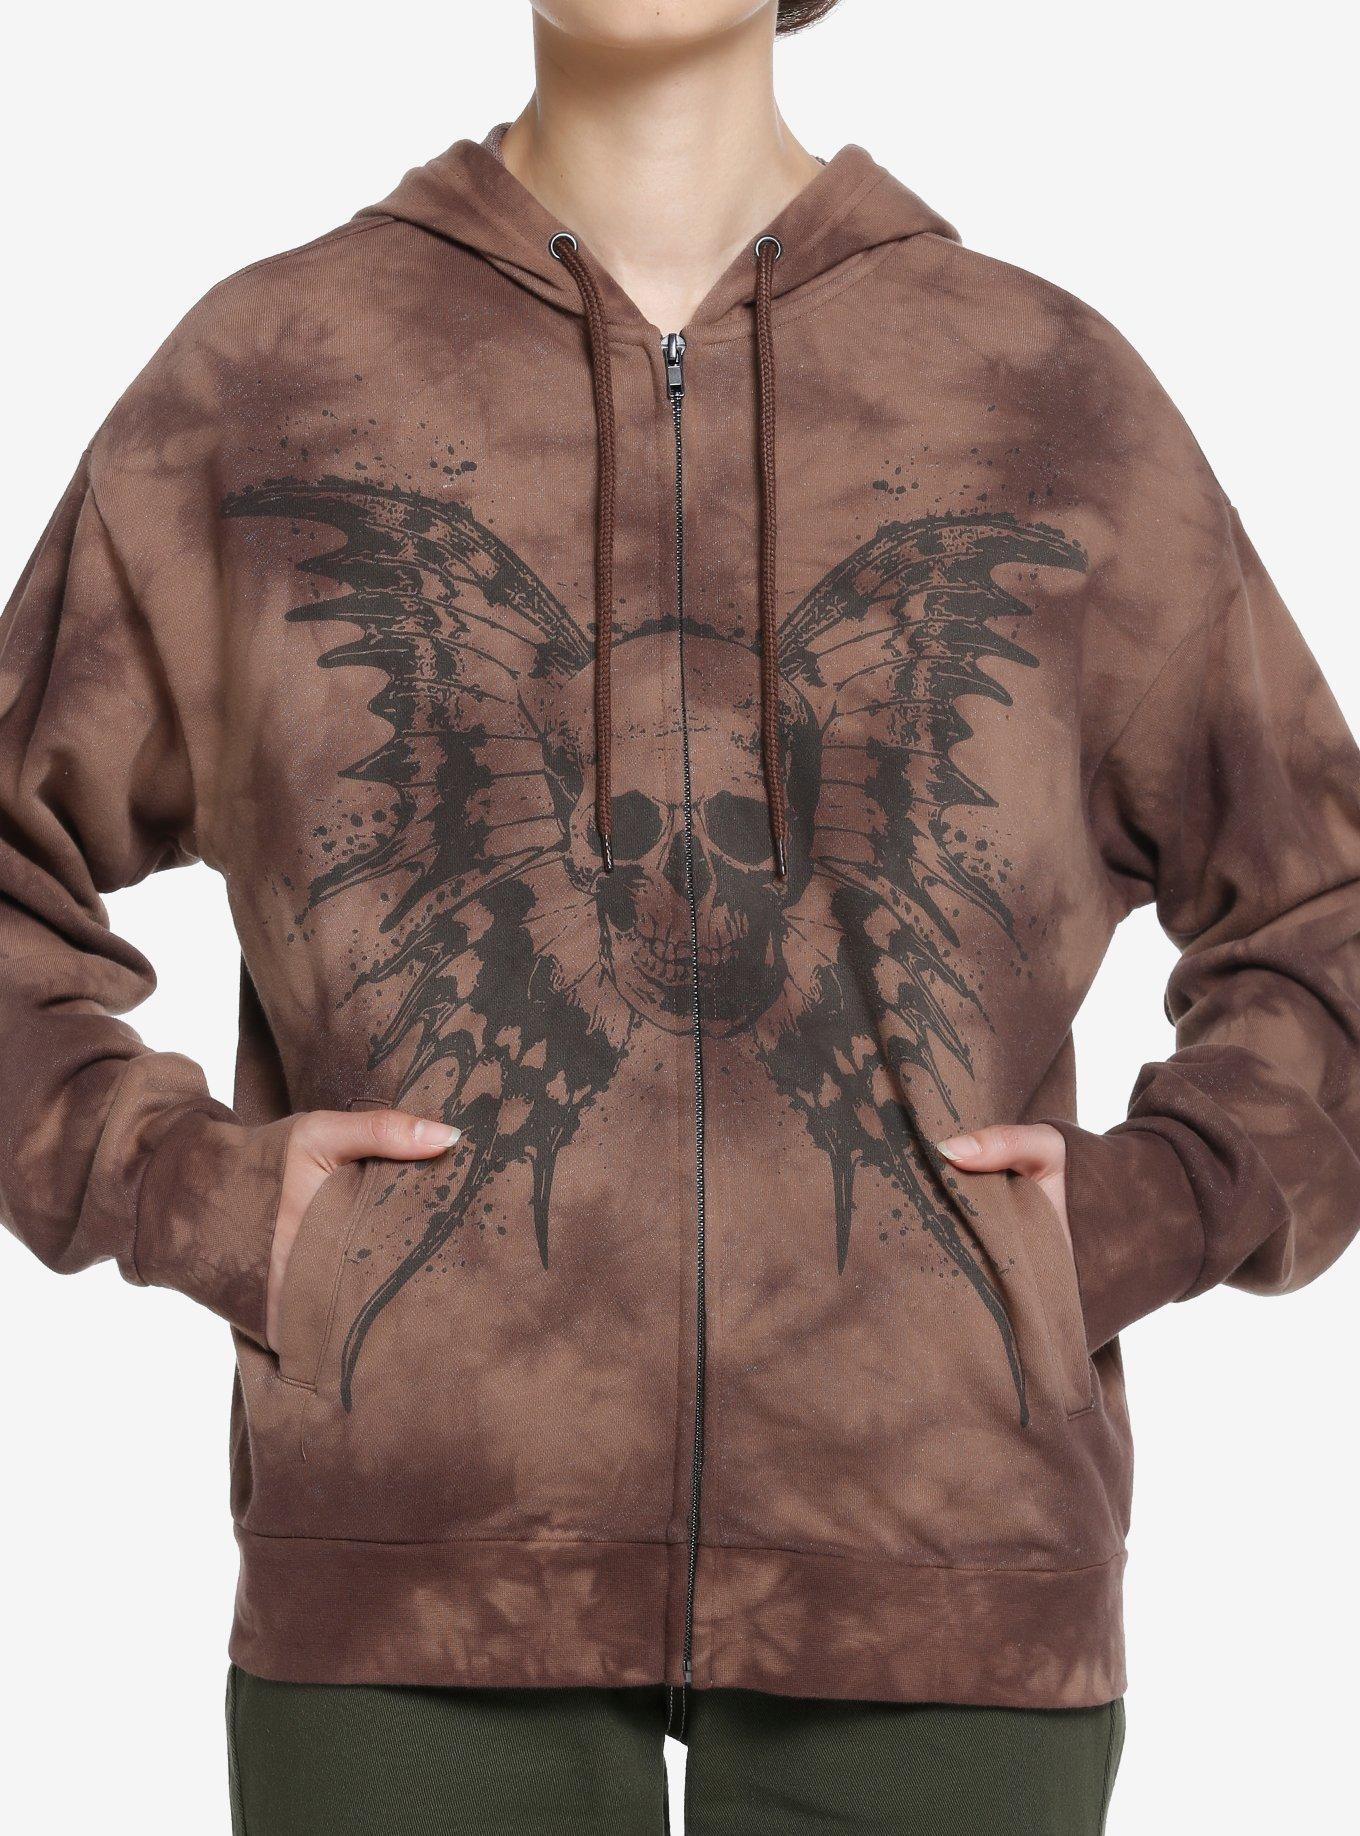 Thorn & Fable Butterfly Skull Brown Wash Girls Oversized Hoodie, BROWN, hi-res